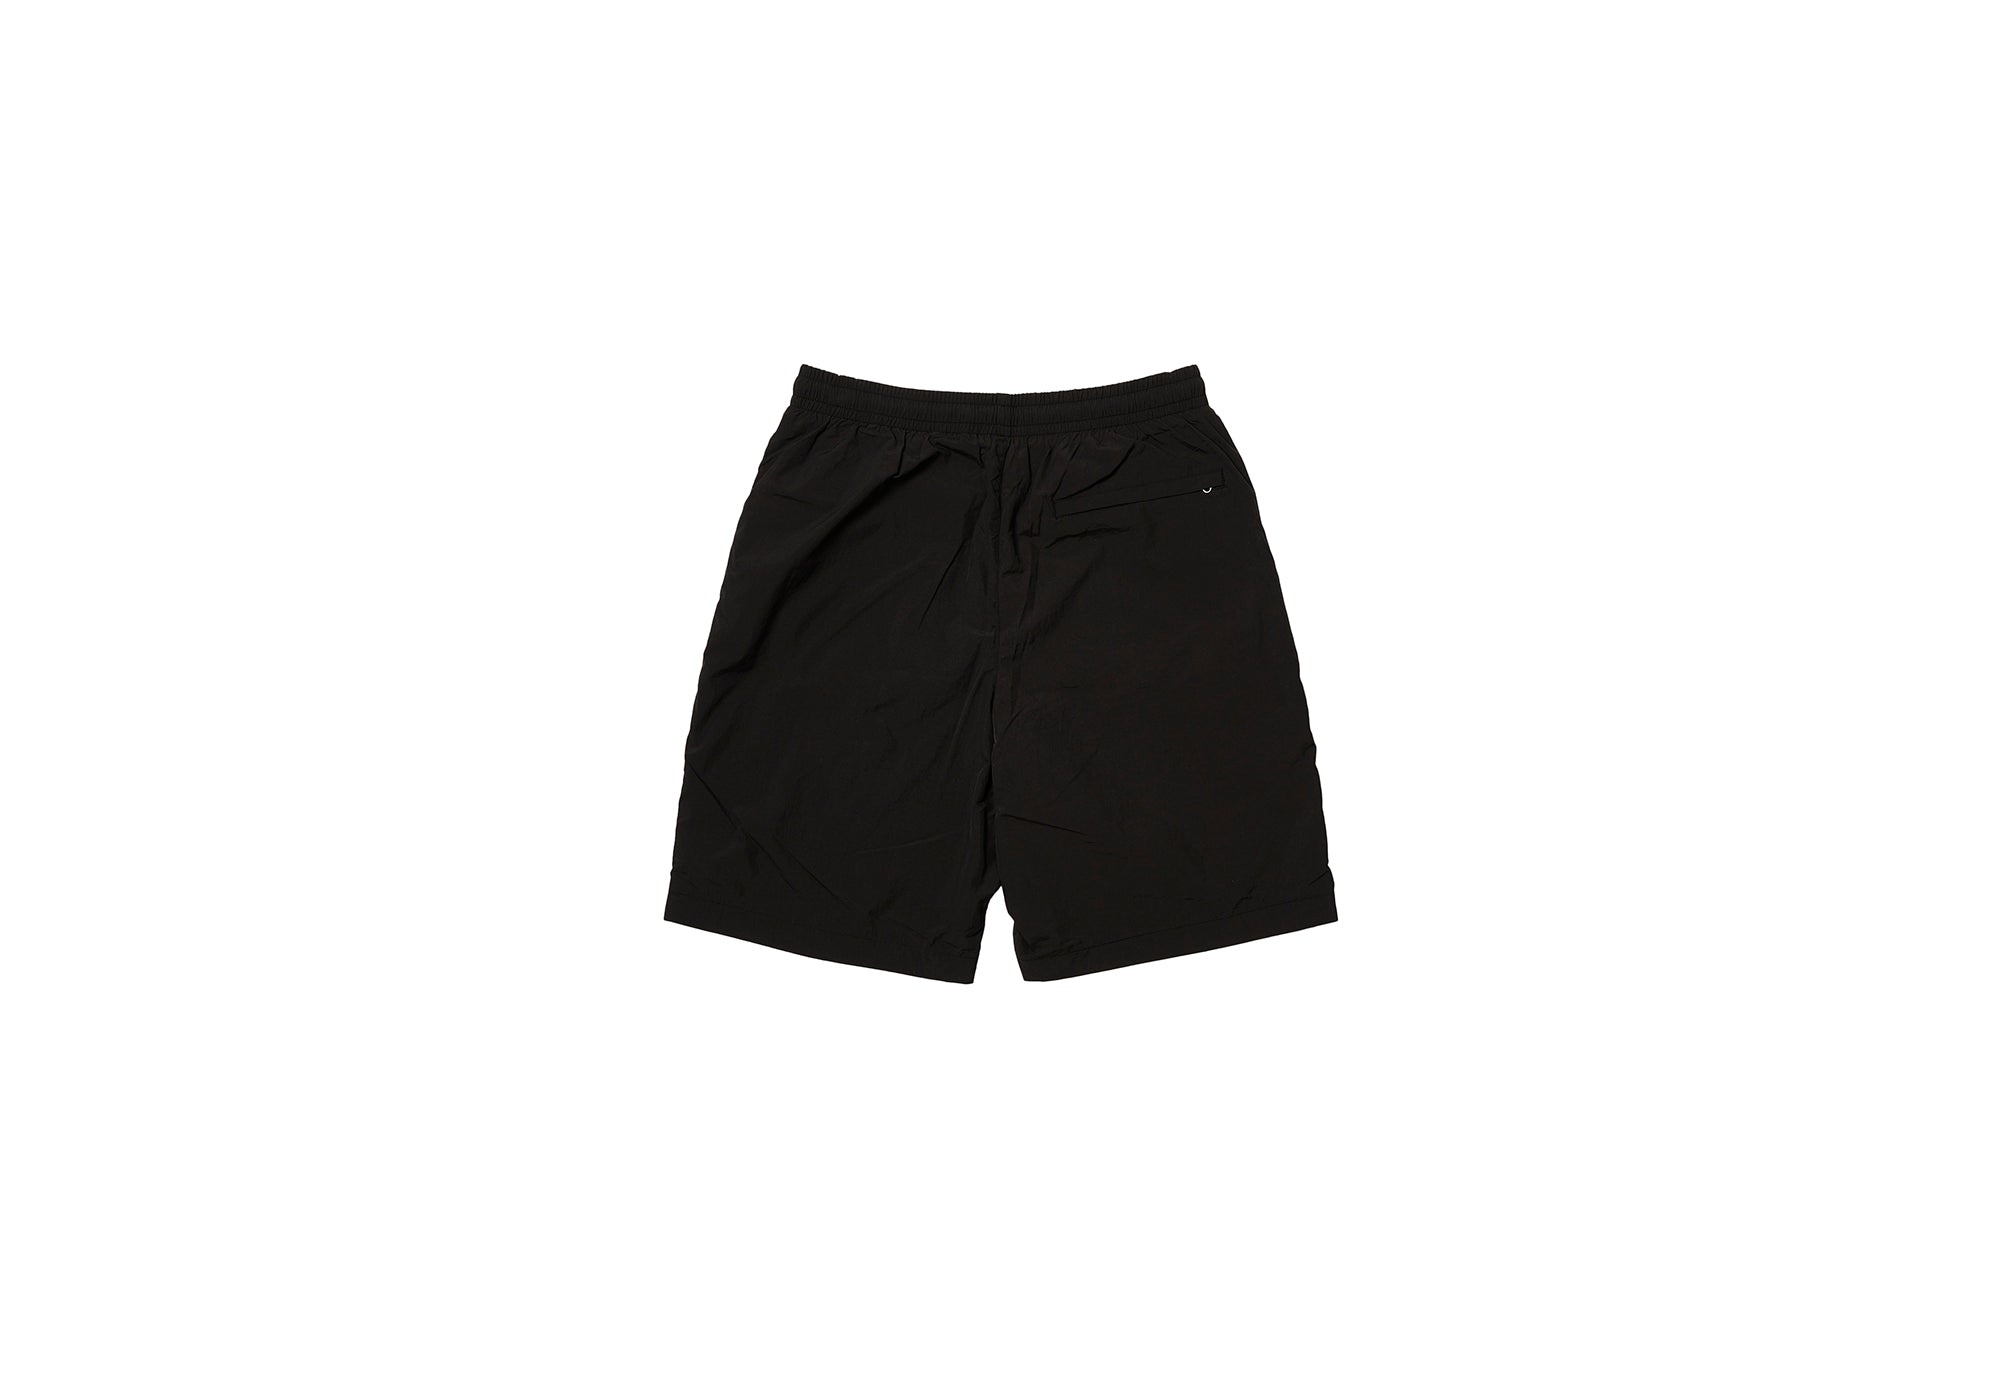 PIPED SHELL SHORT BLACK - 2